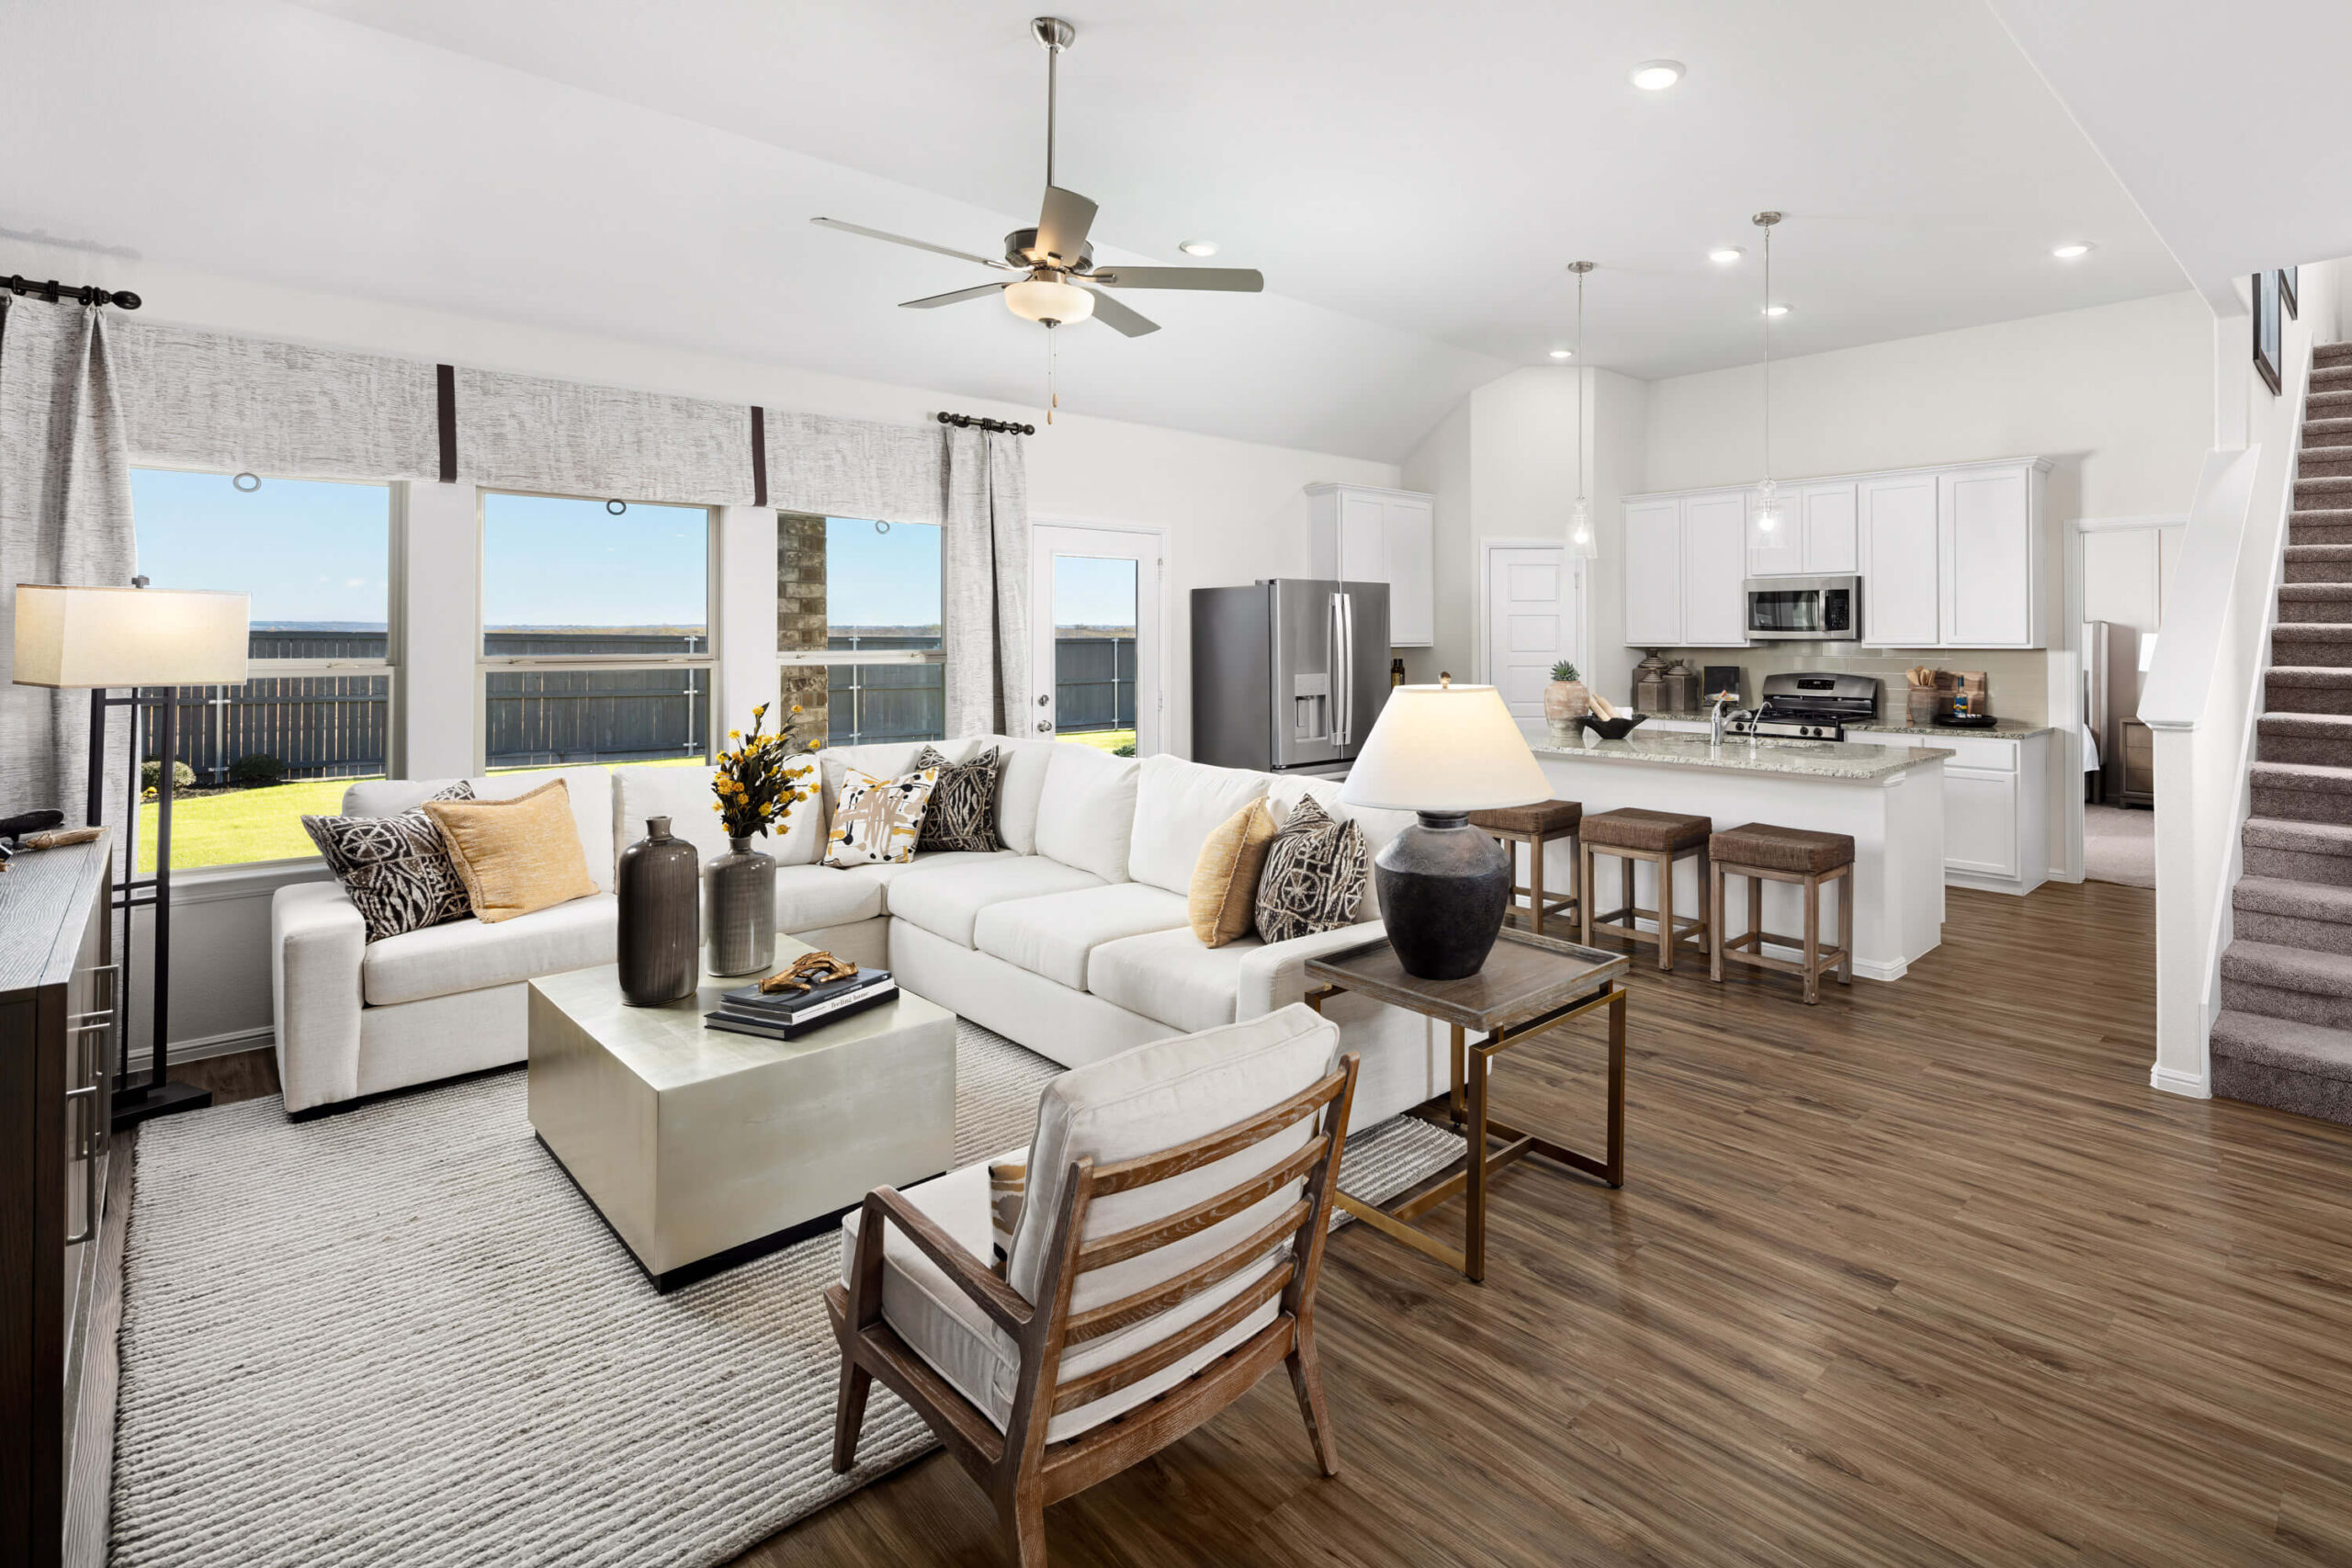 A bright, modern open-plan living room with a kitchen, dining, and lounge area in new homes in Mansfield TX, featuring contemporary decor and large windows.